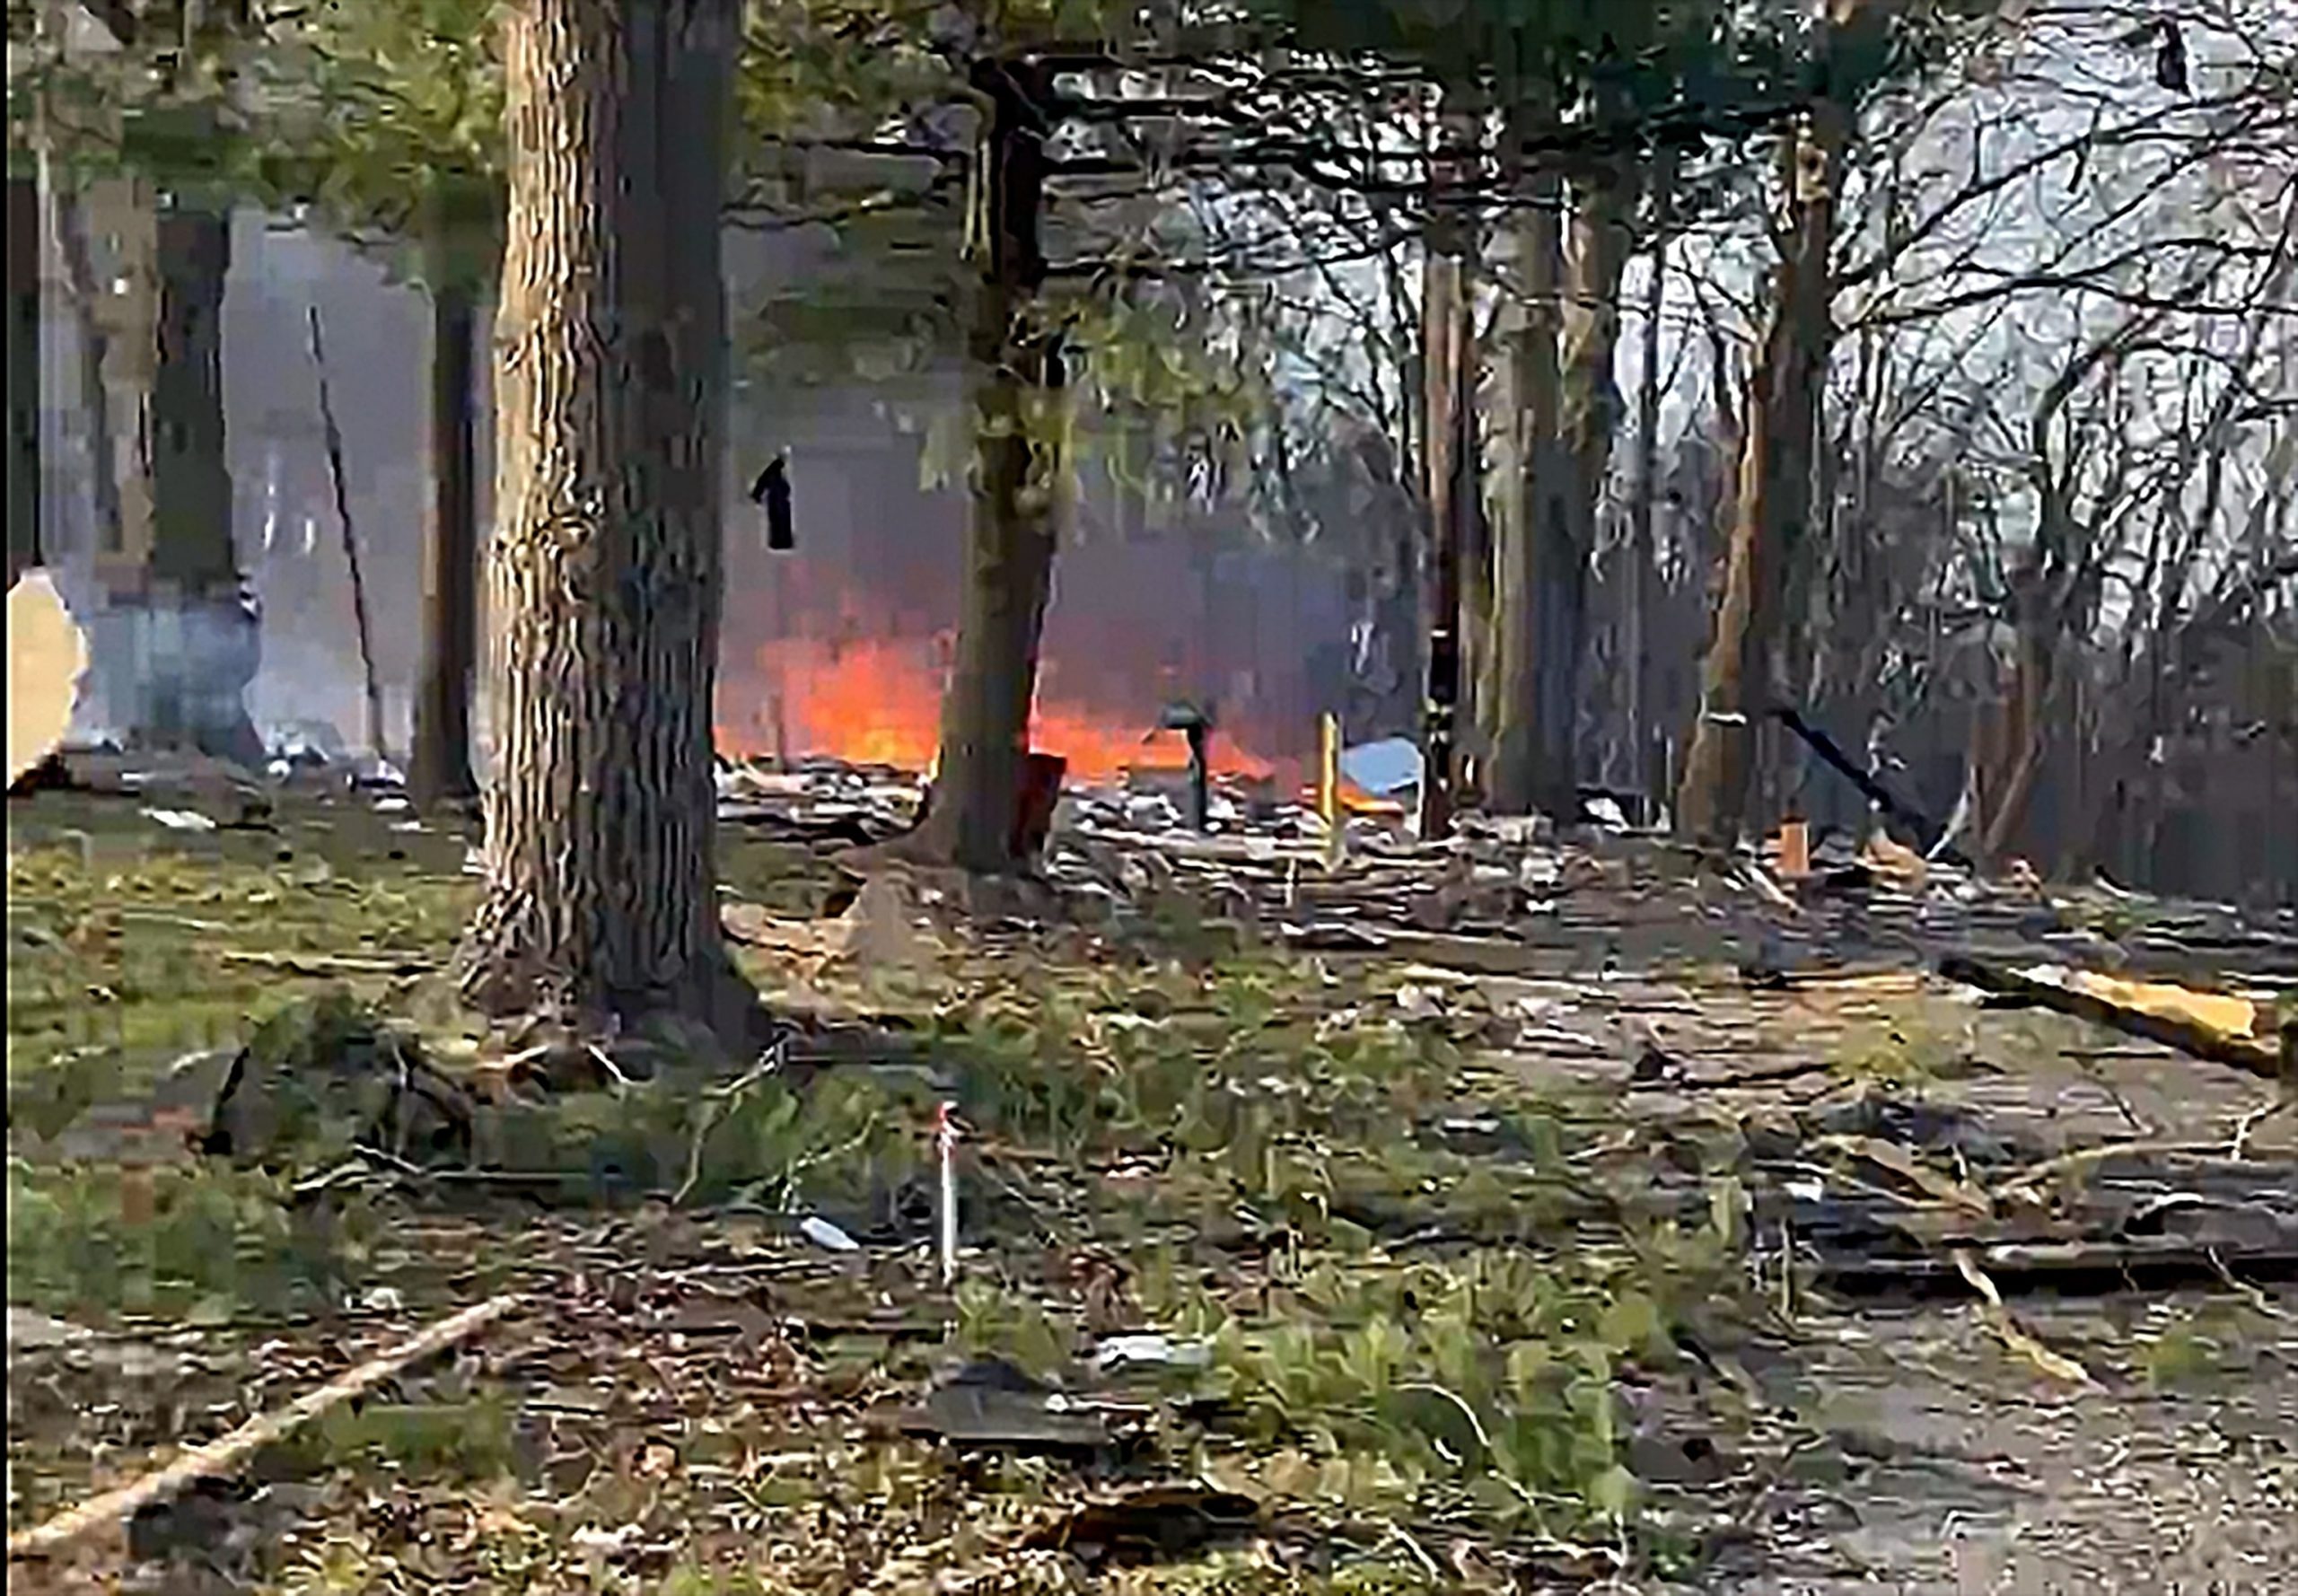 Two individuals discovered deceased following house explosion and fire in Pennsylvania